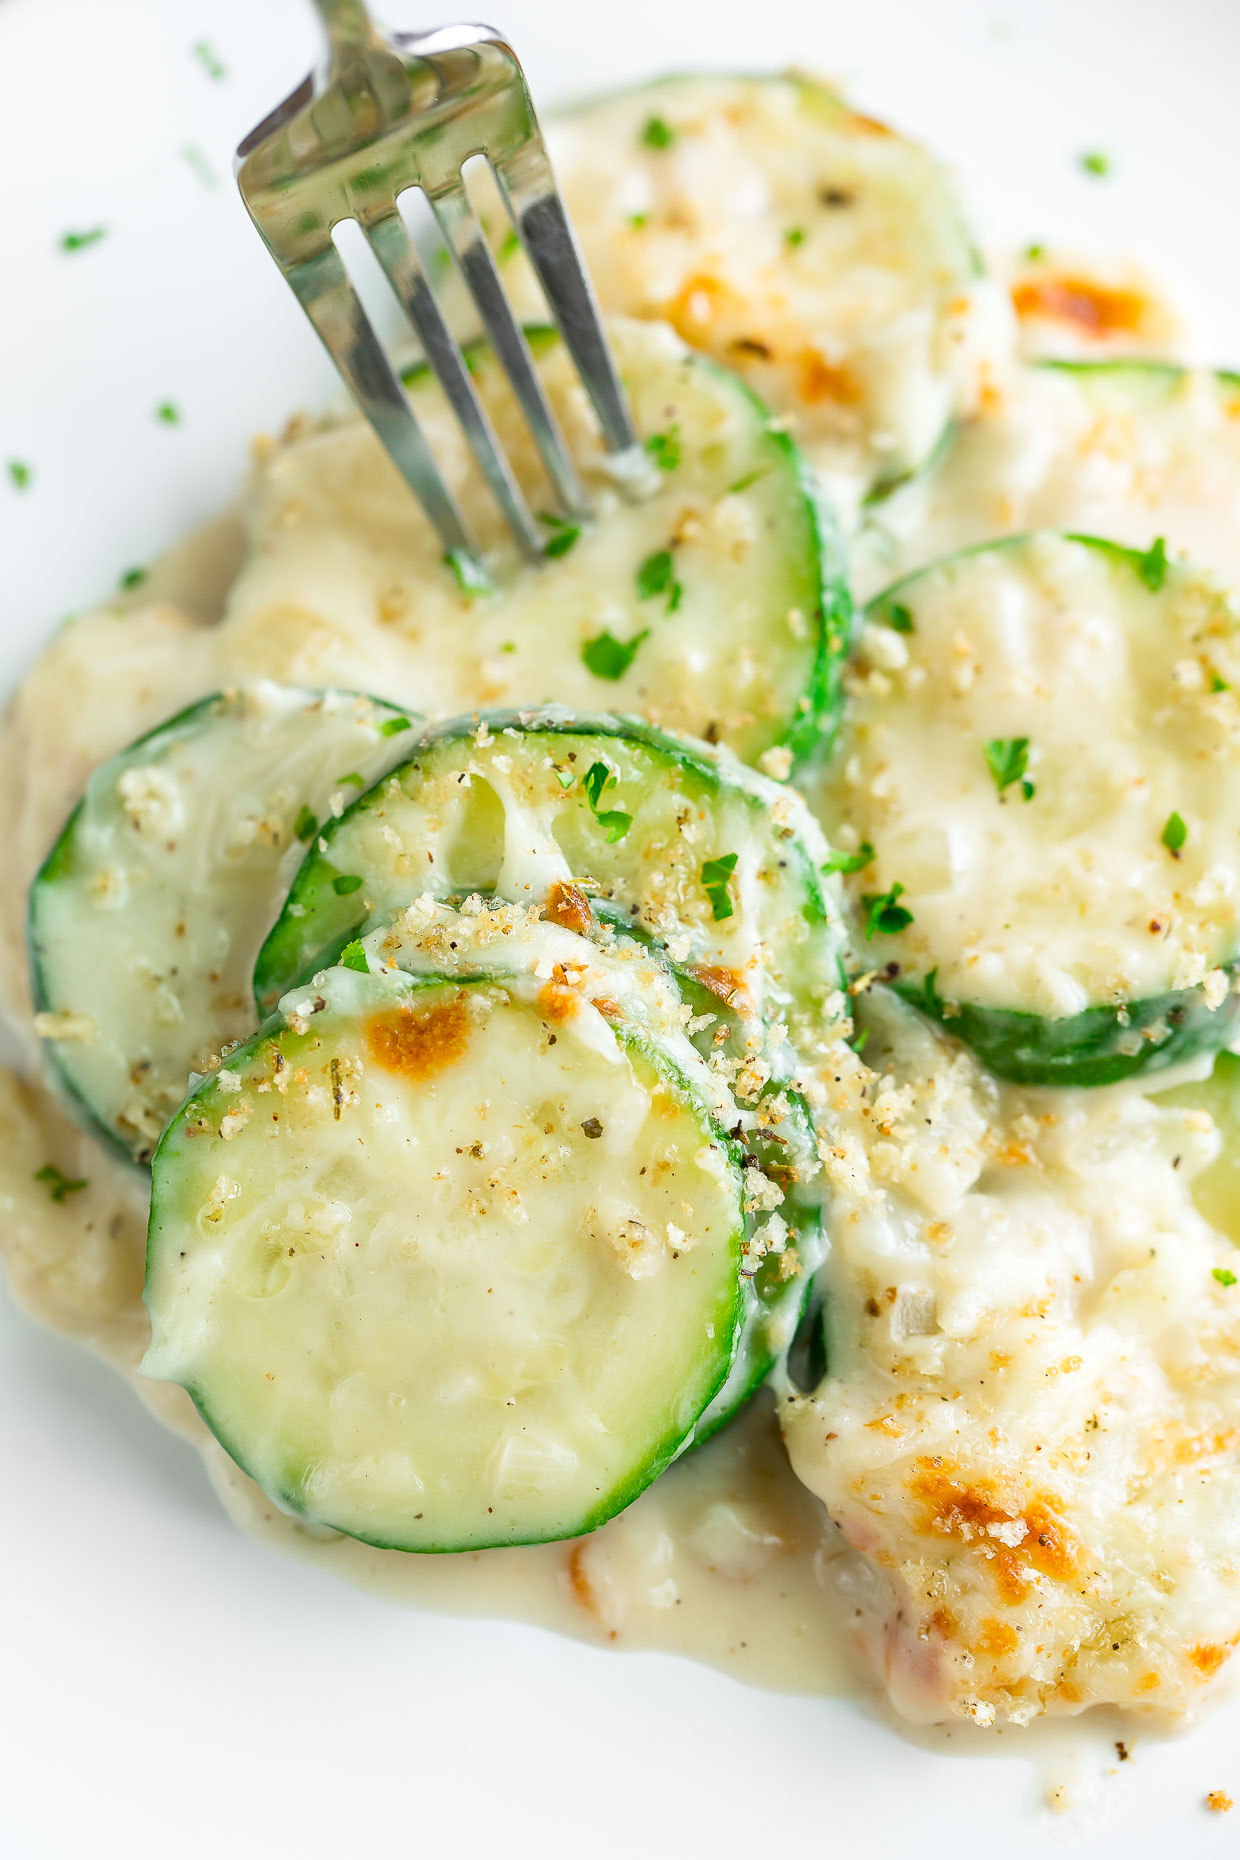 Baked Zucchini Casserole - Recipes by Peas and Crayons